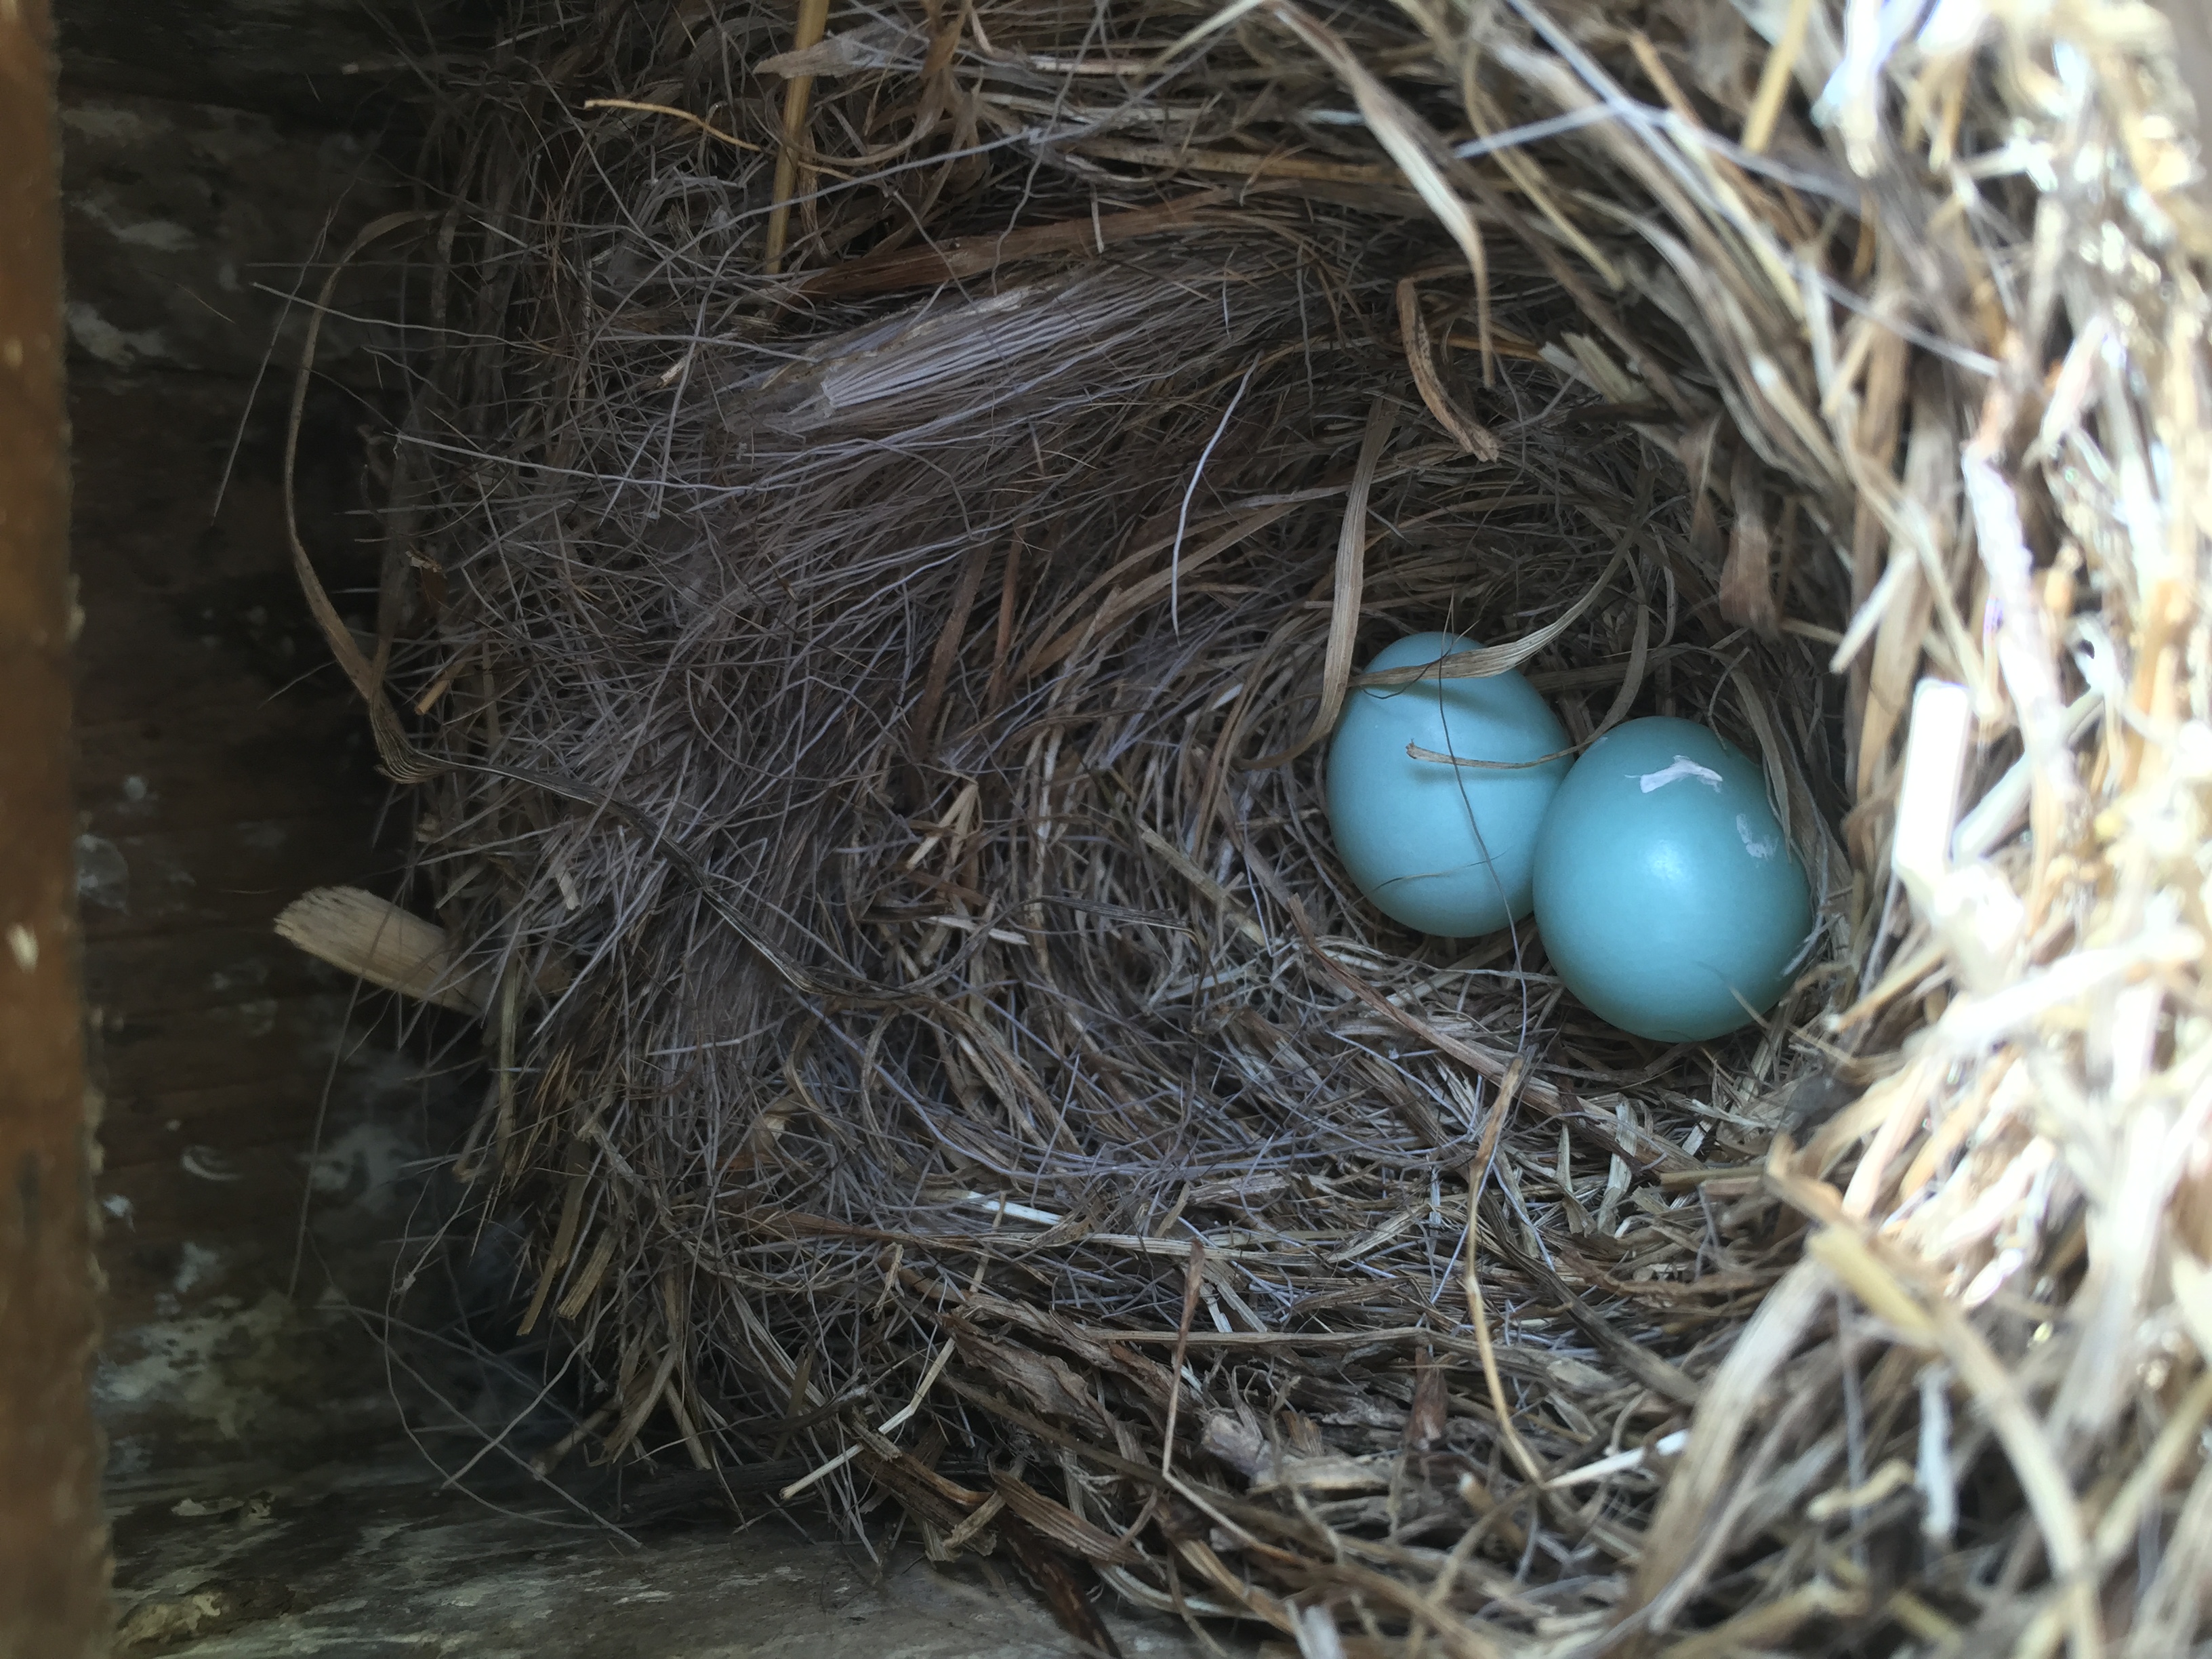 Bluebird eggs found in nest while monitoring boxes 2016